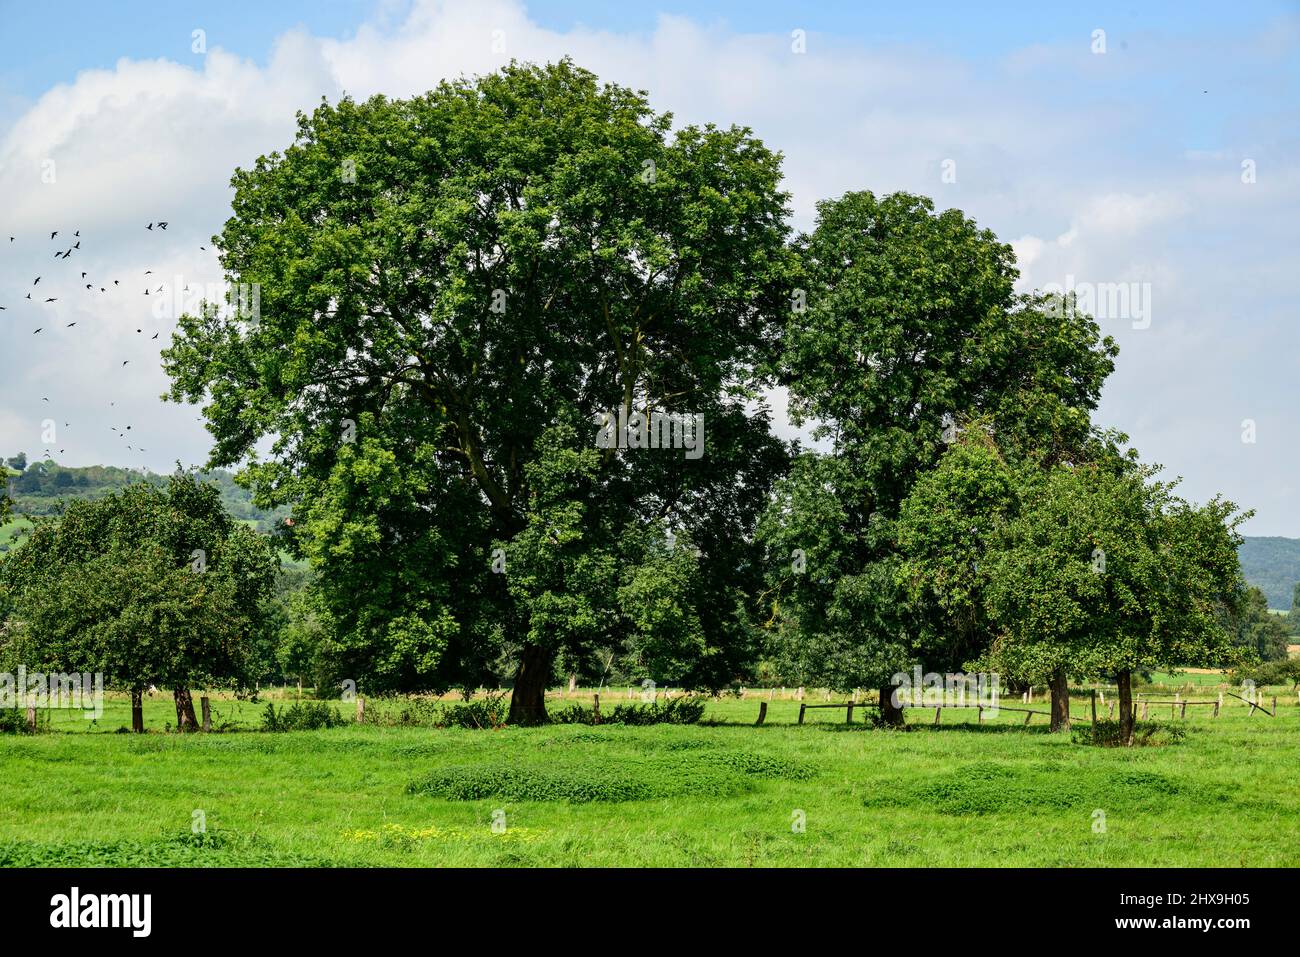 Group of ash trees (Fraxinus excelsior) with green foliage under a cloudy blue sky on a floodplain meadow near the Emmer river, Lügde, Germany Stock Photo